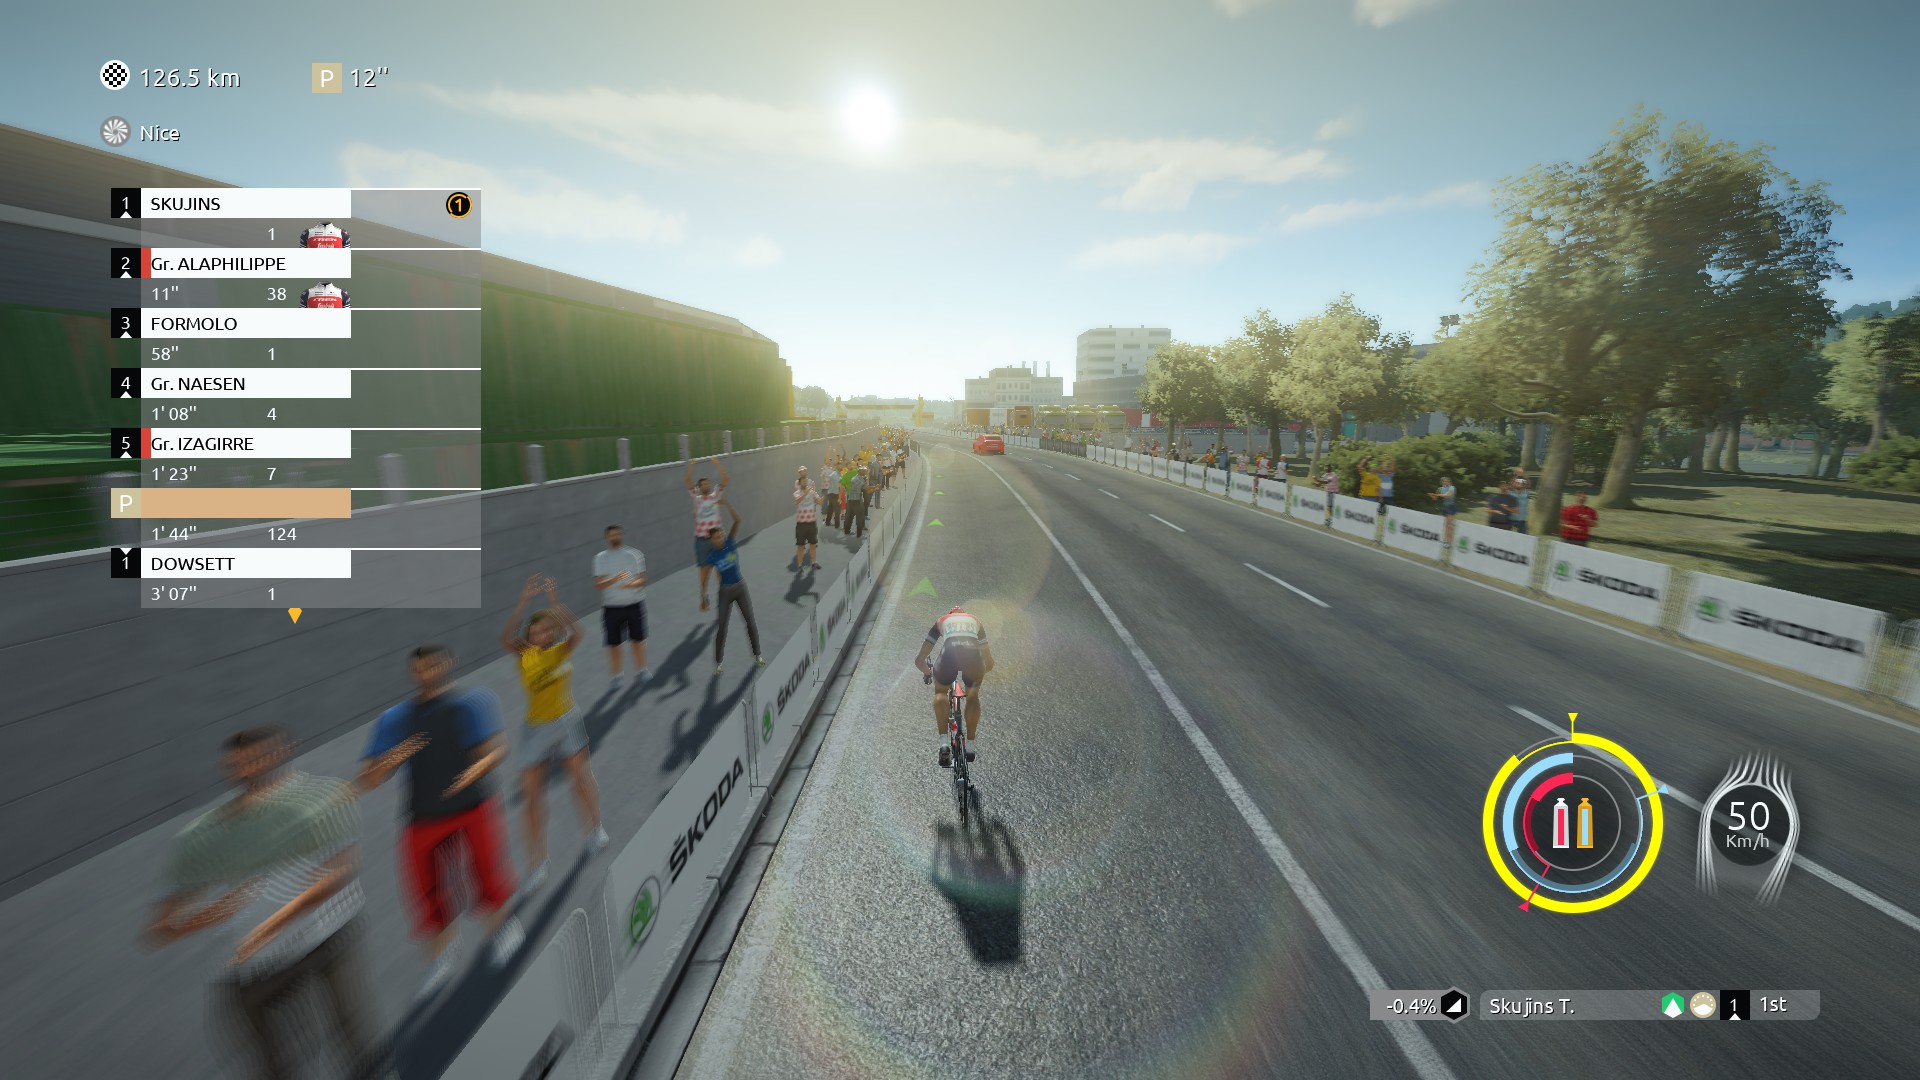 Tour de France 2020 Available Now on PC - Operation Sports